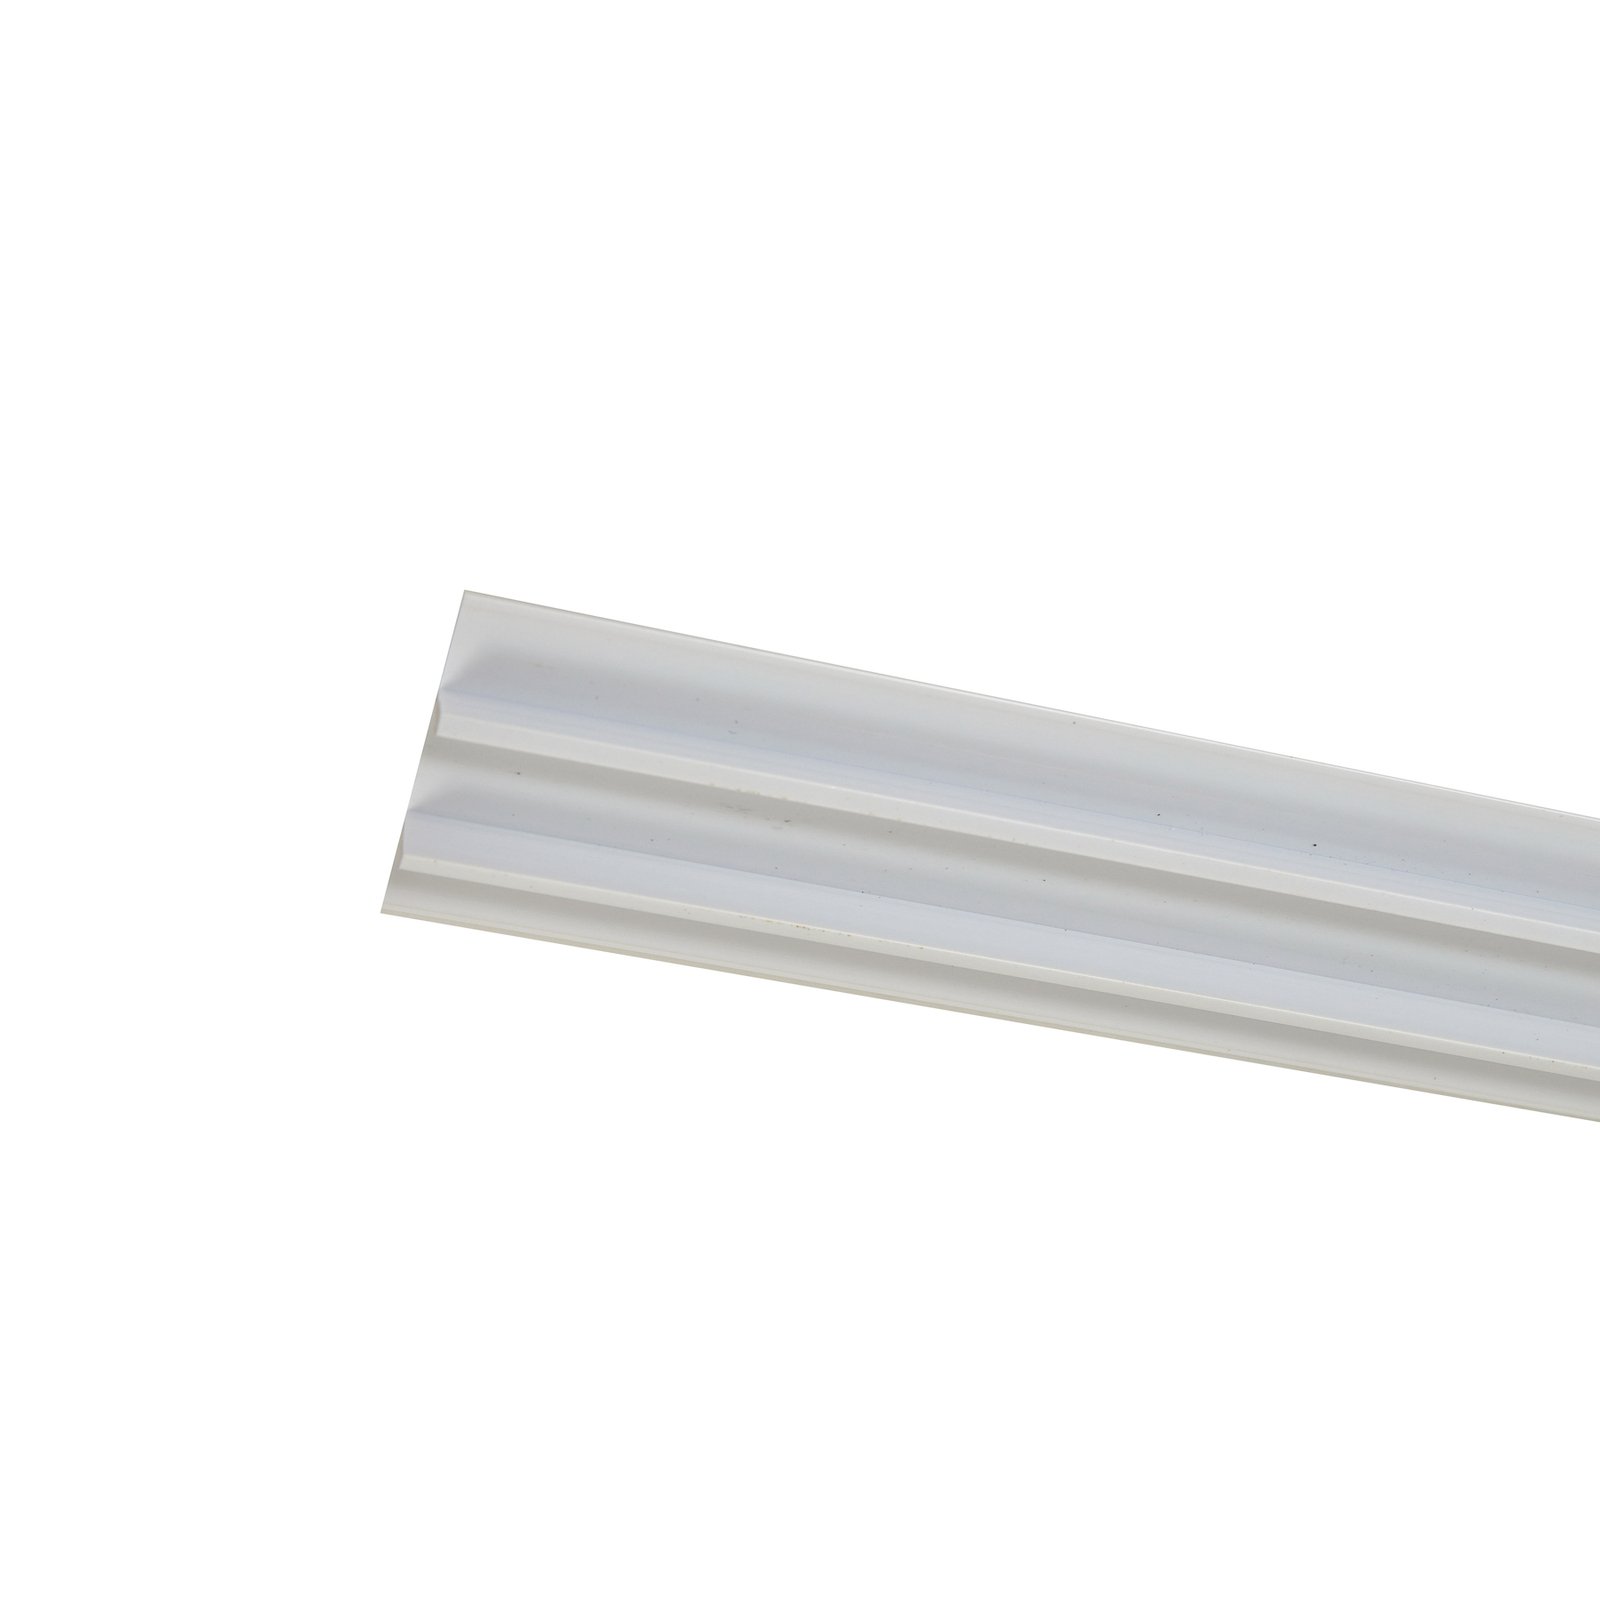 Lindby cover Linaro, white, single-circuit track lighting system, 50 cm